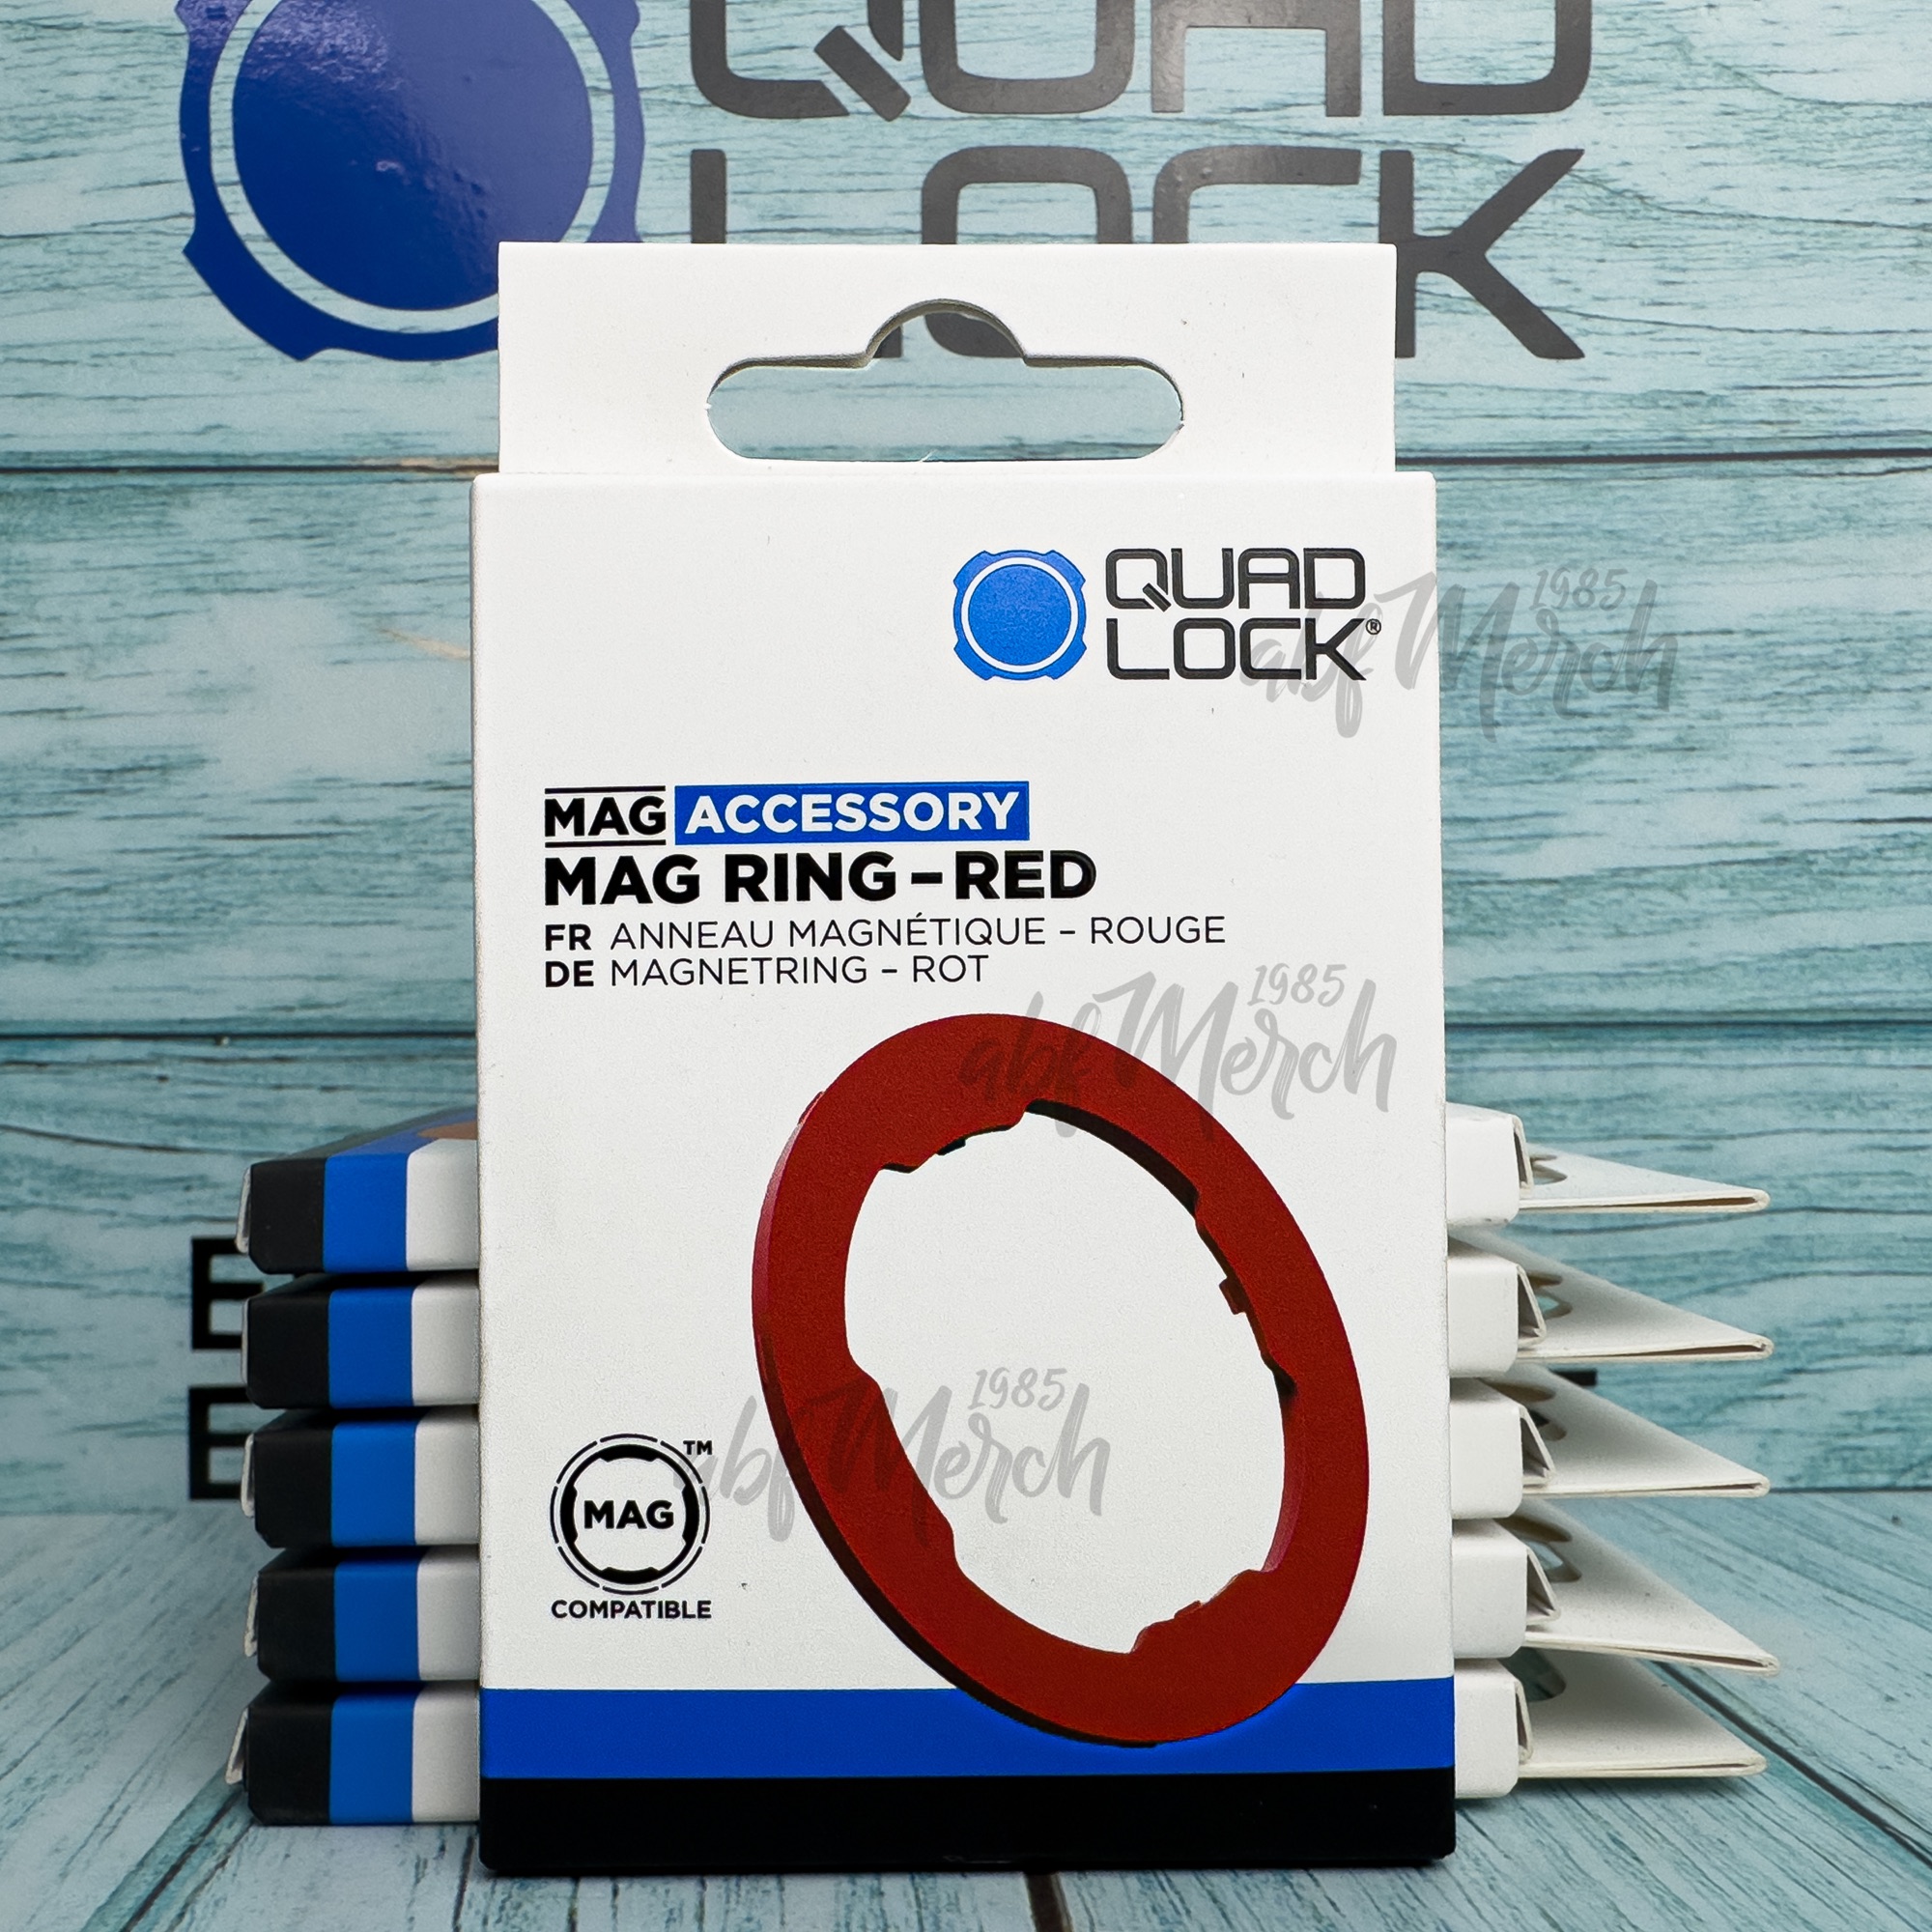 MAG Case - Colored Ring - Quad Lock® USA - Official Store